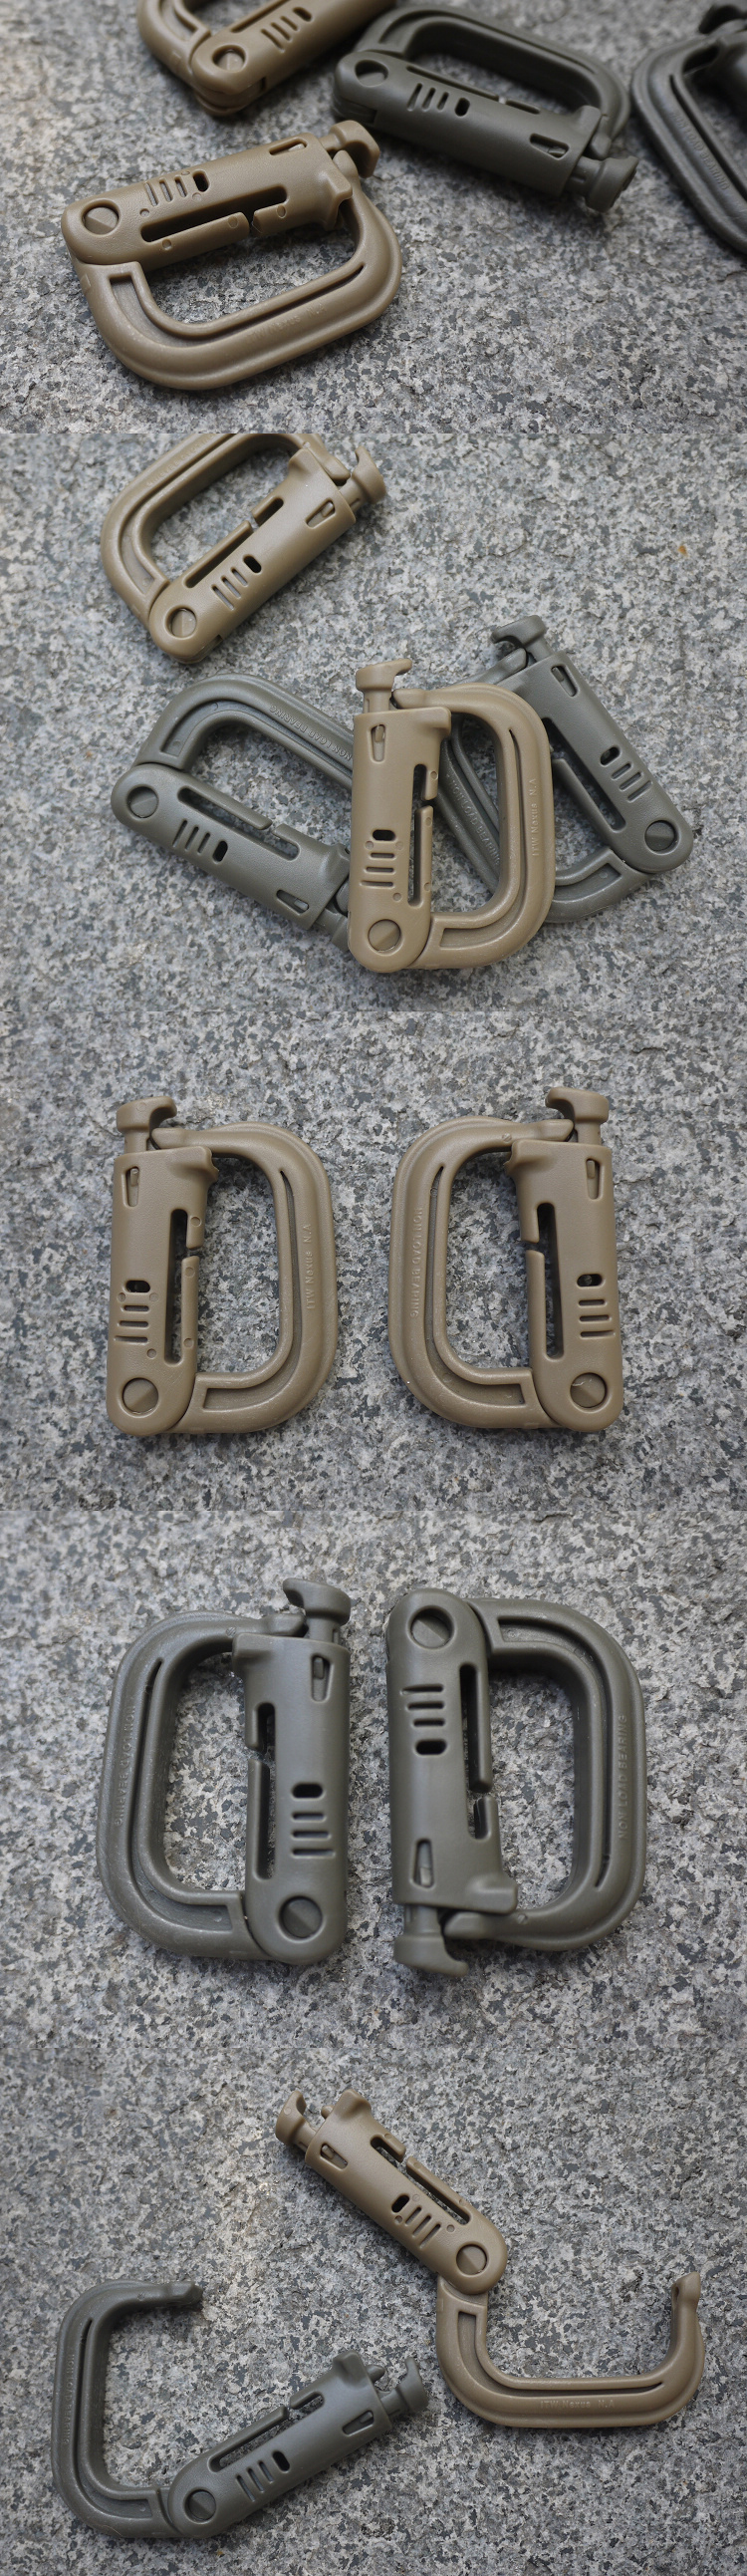 1-Piece-MOLLE-ITW-Nexus-GrimLoc-D-Ring--Locking-Clips-4-Colors-for-Optional-1000599-2